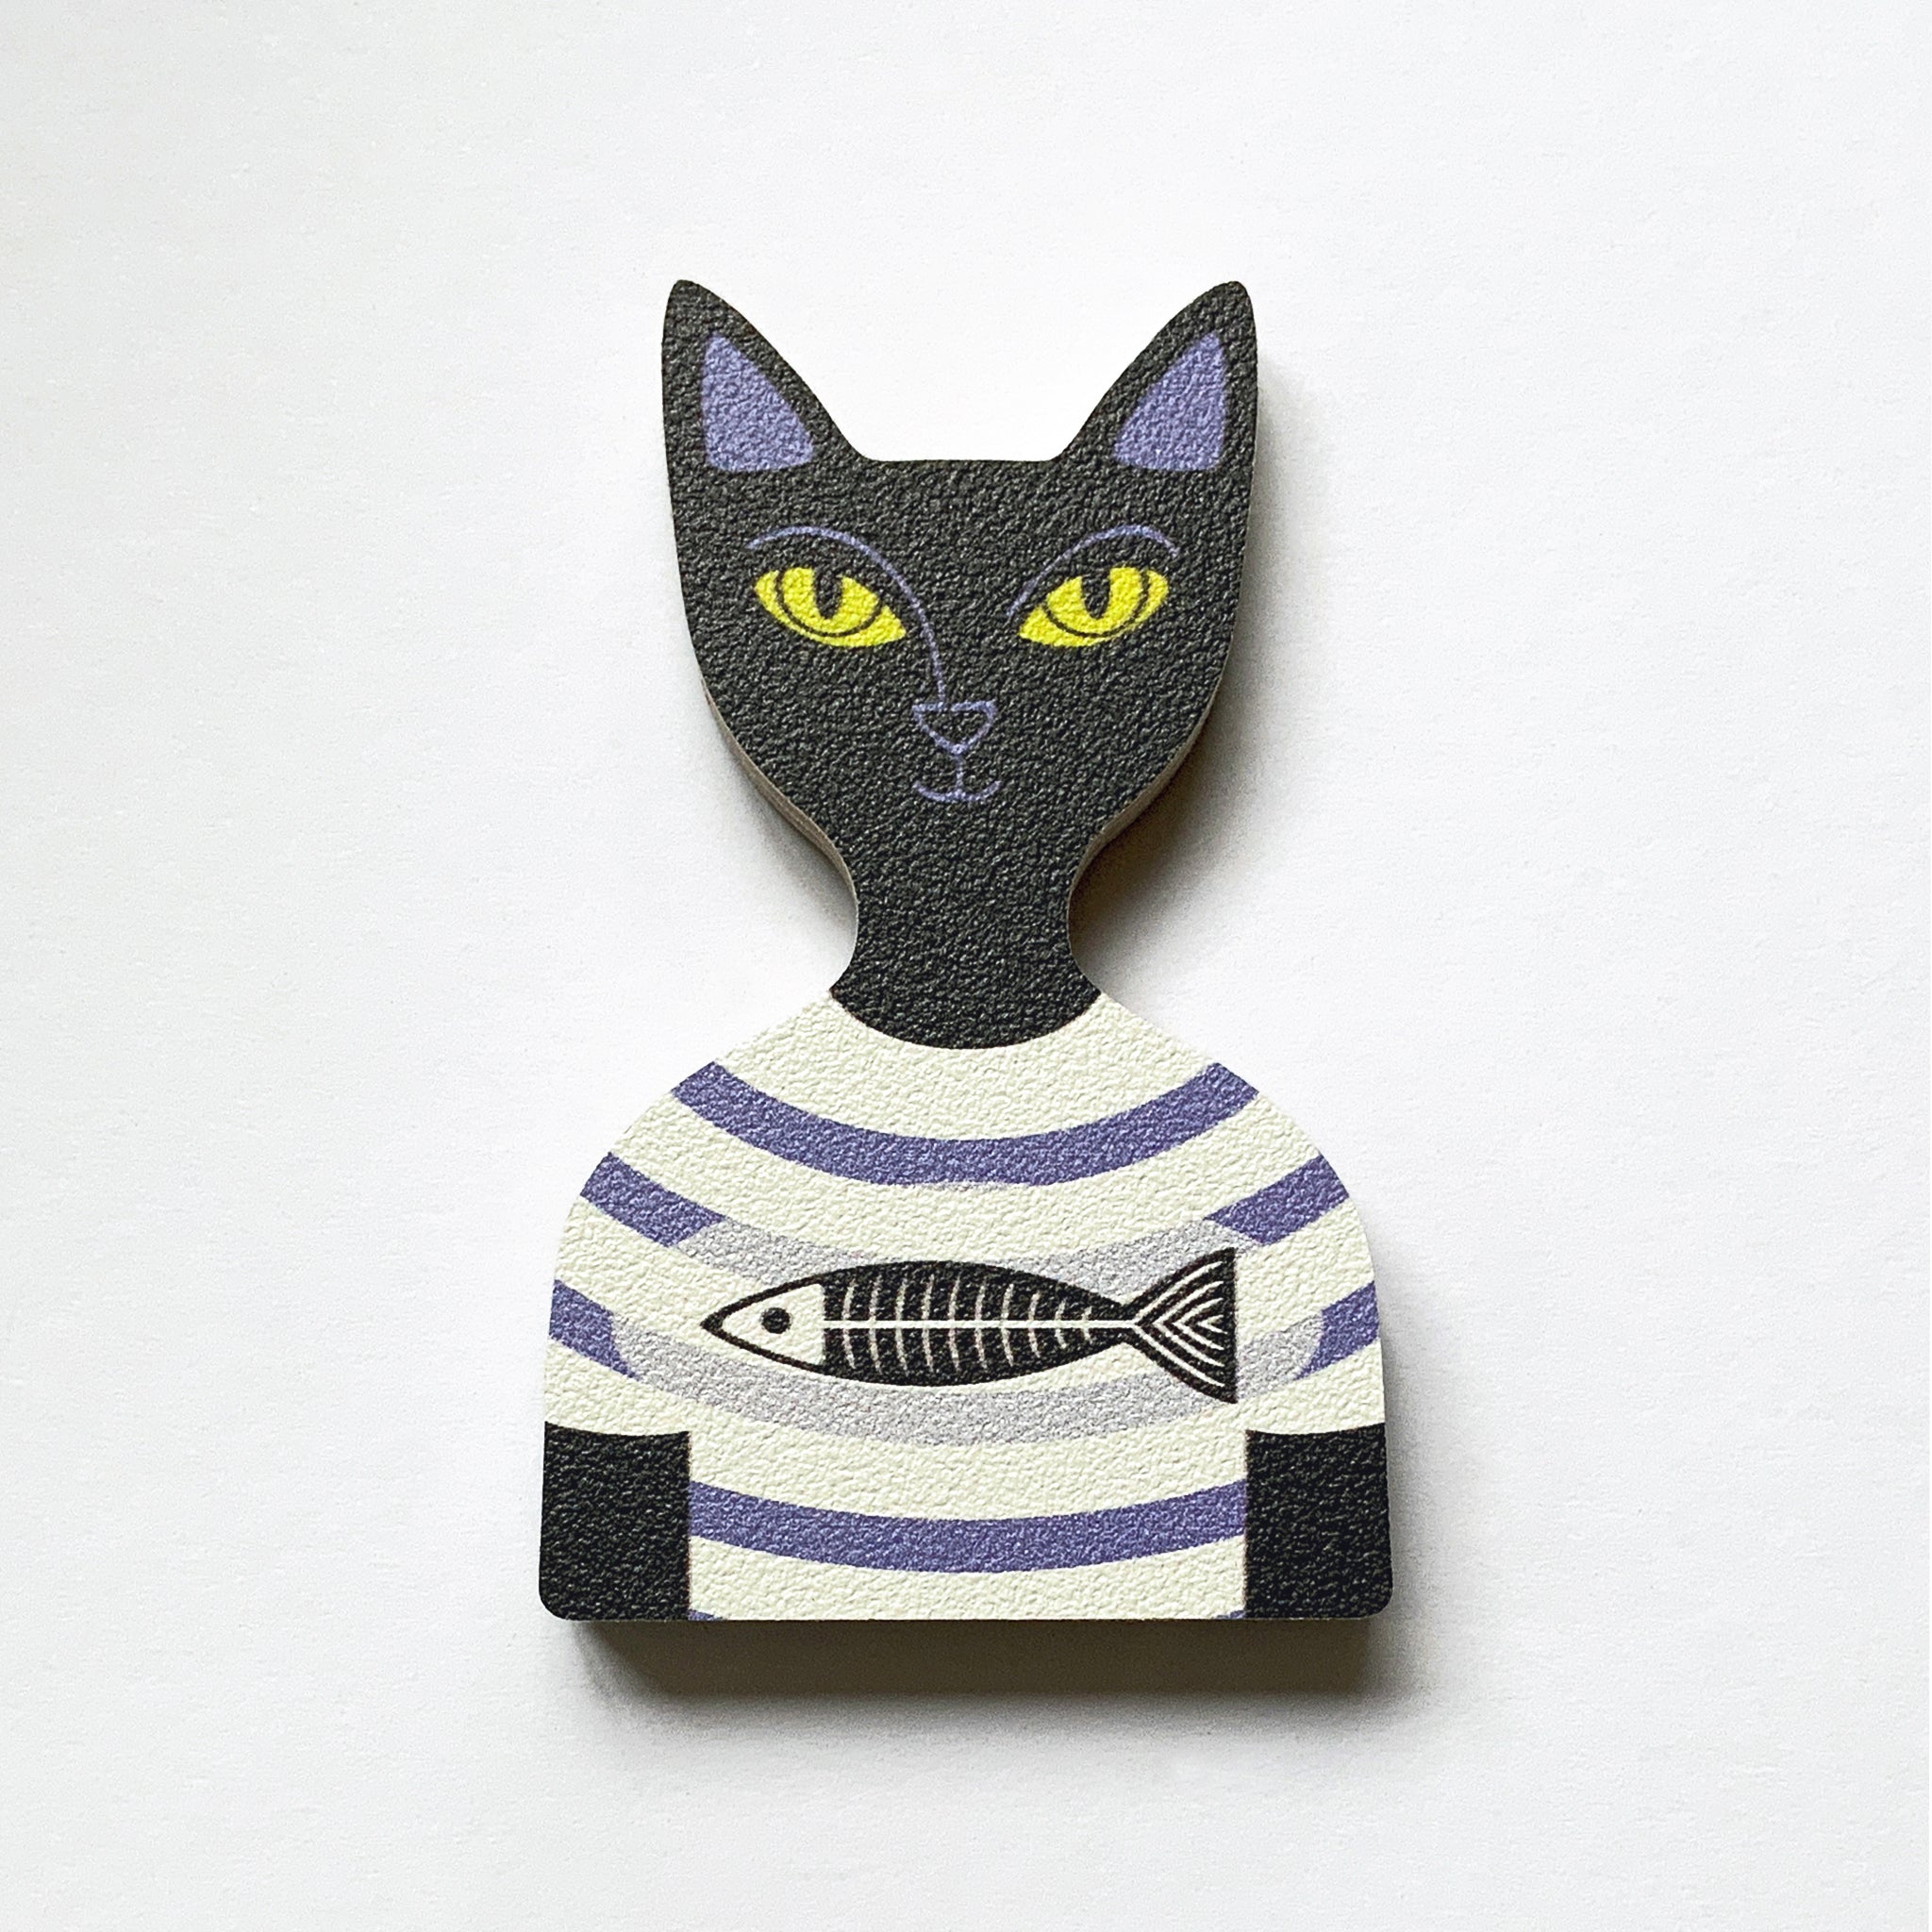 A black cat in a mauve and white striped t-shirt design plywood fridge magnet by Beyond the Fridge